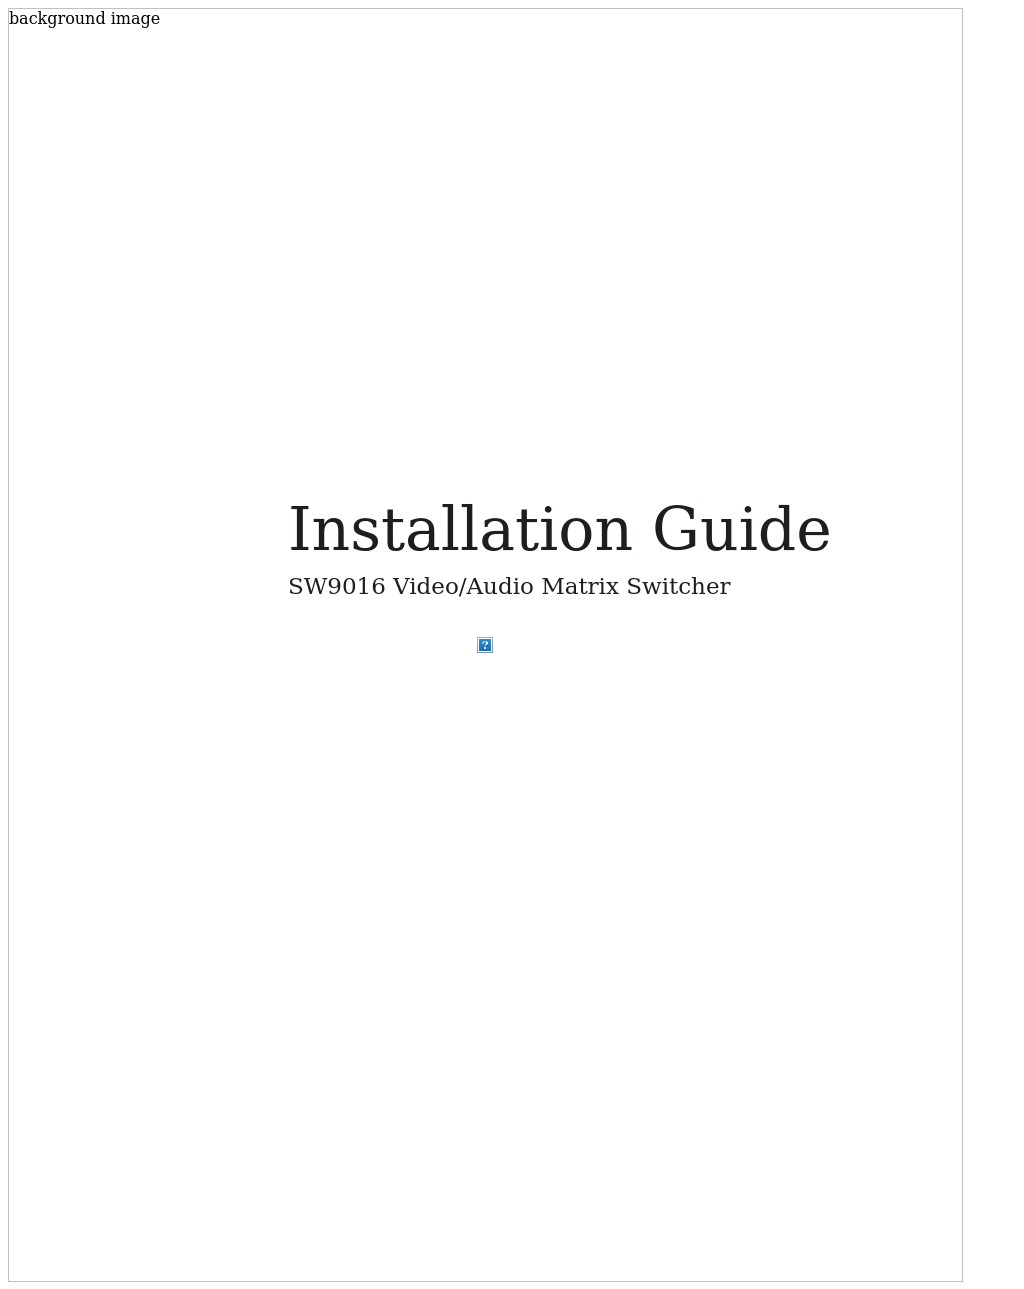 sw9016 Install Guide